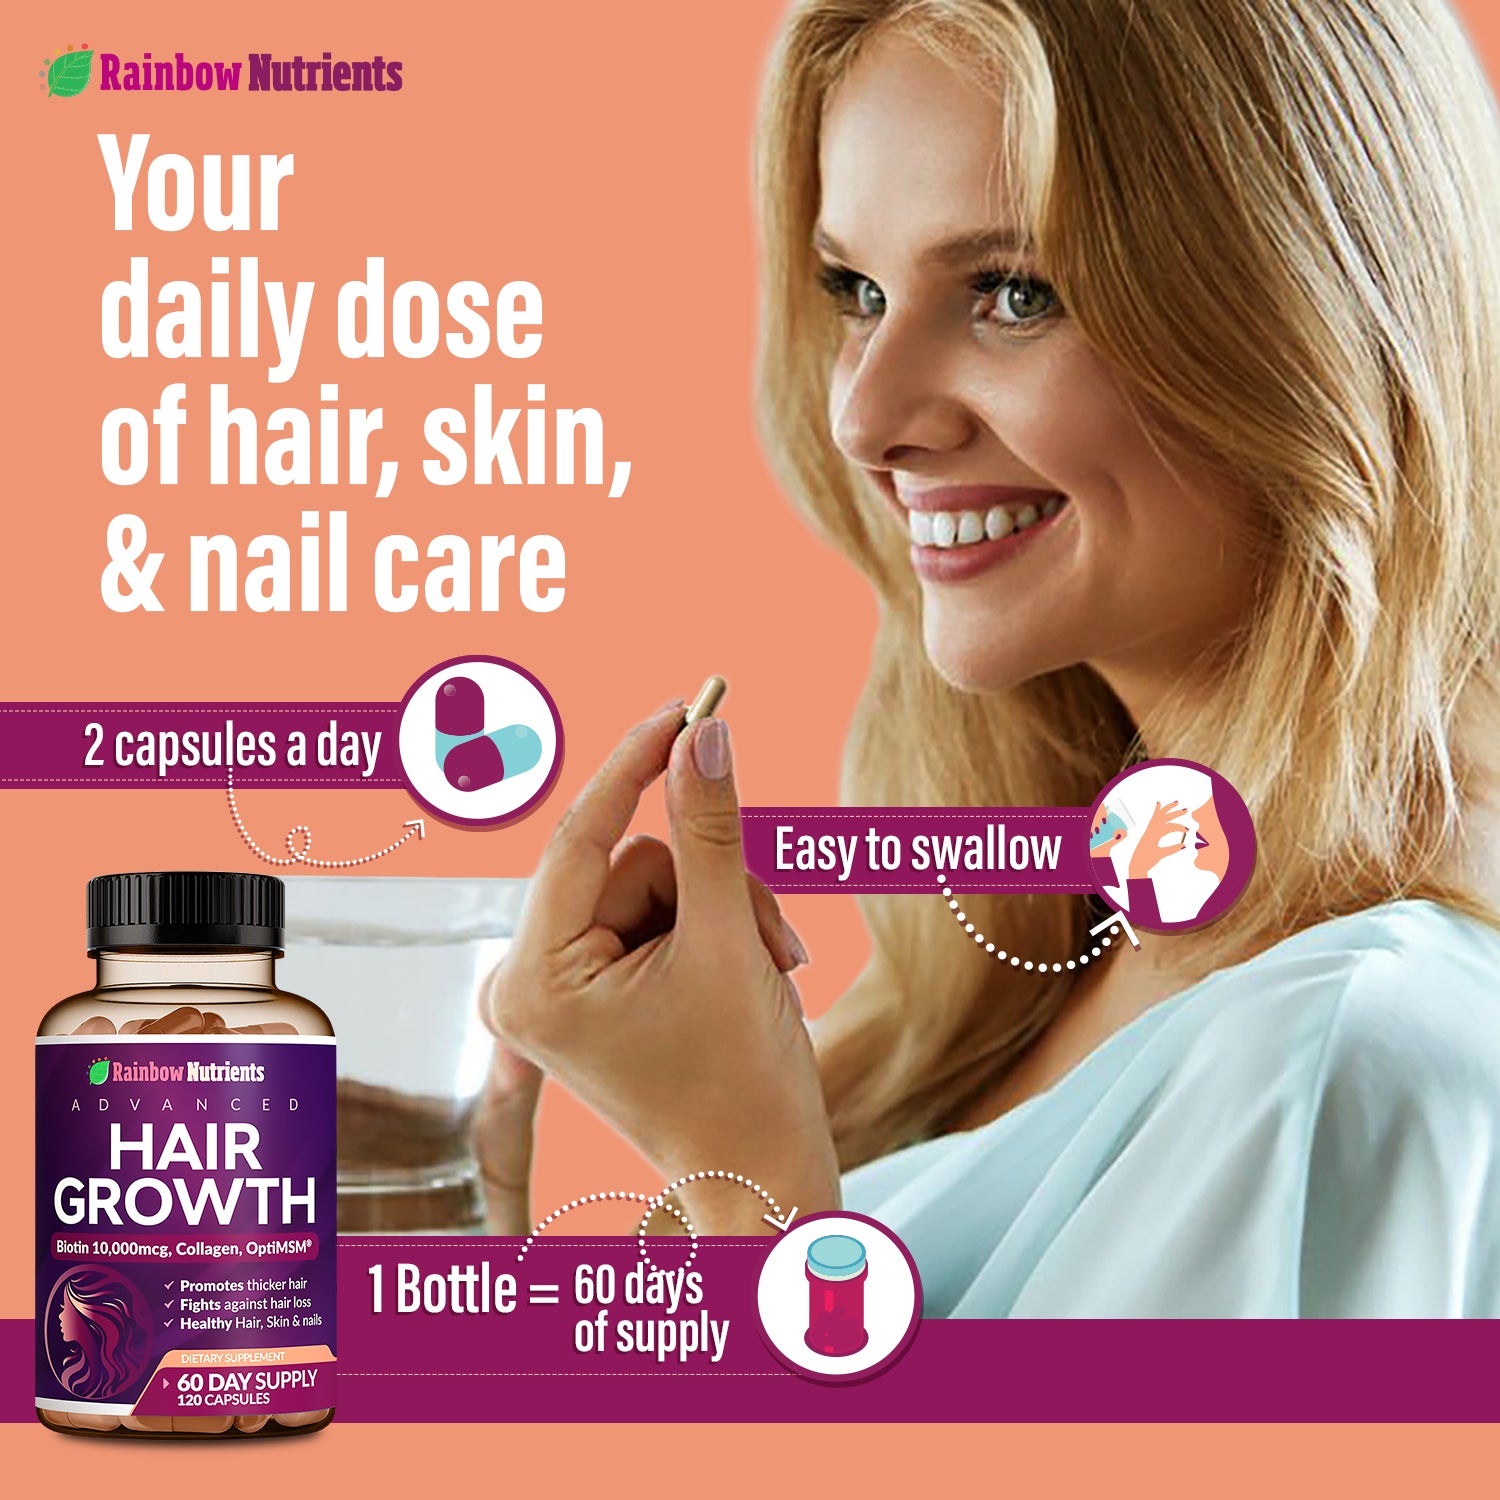 Your daily does of hair, skin, and nail care